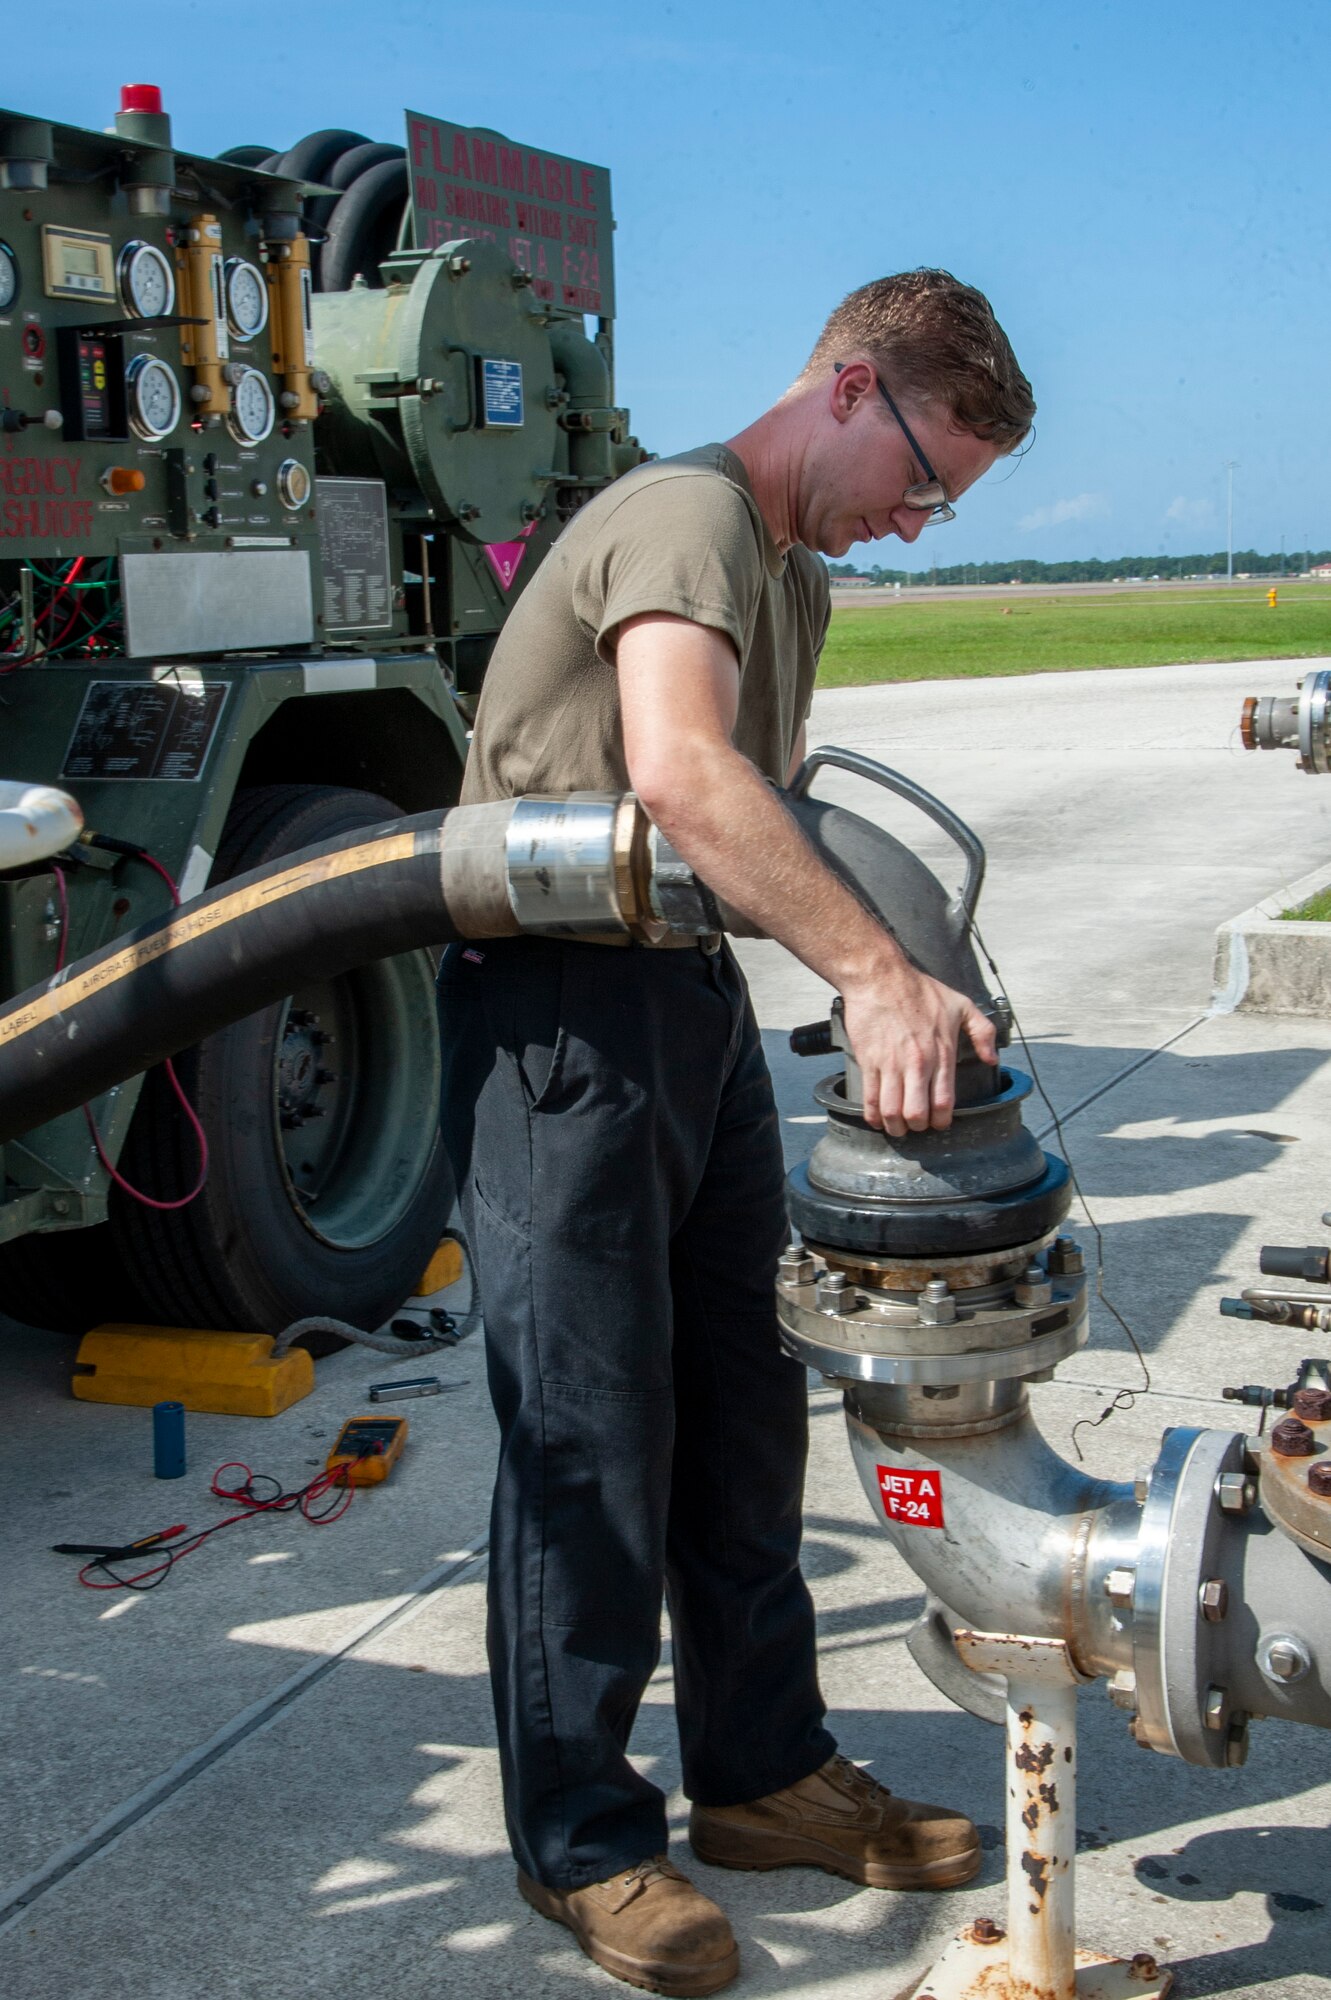 U.S. Air Force Senior Airman Sean Kissel, a 6th Logistics Readiness Squadron firetruck and refueling mechanic connects a nozzle from an R-12 refueling truck to a jet fuel hydrant system, July 15, 2020, at MacDill Air Force Base, Fla.